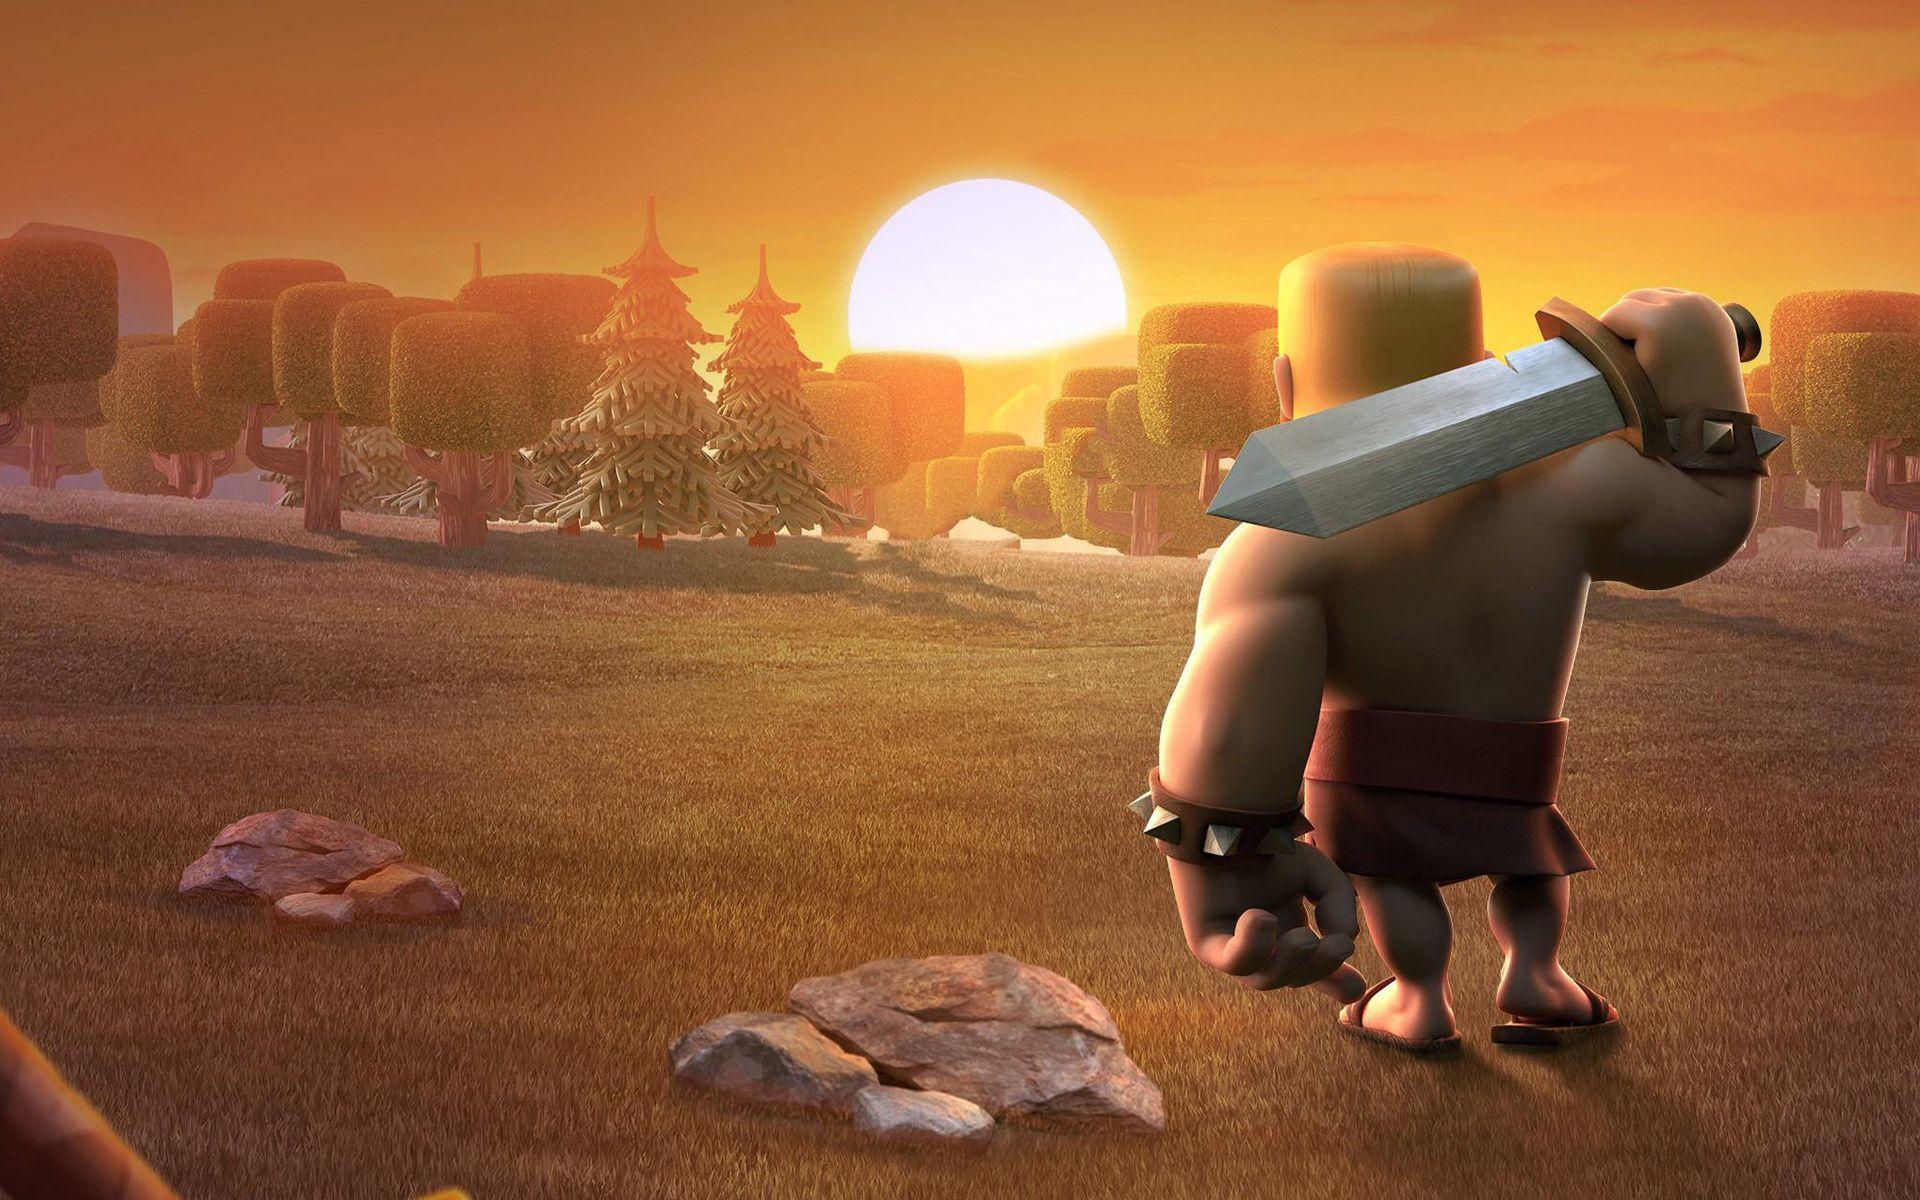 Clash of Clans Wallpaper